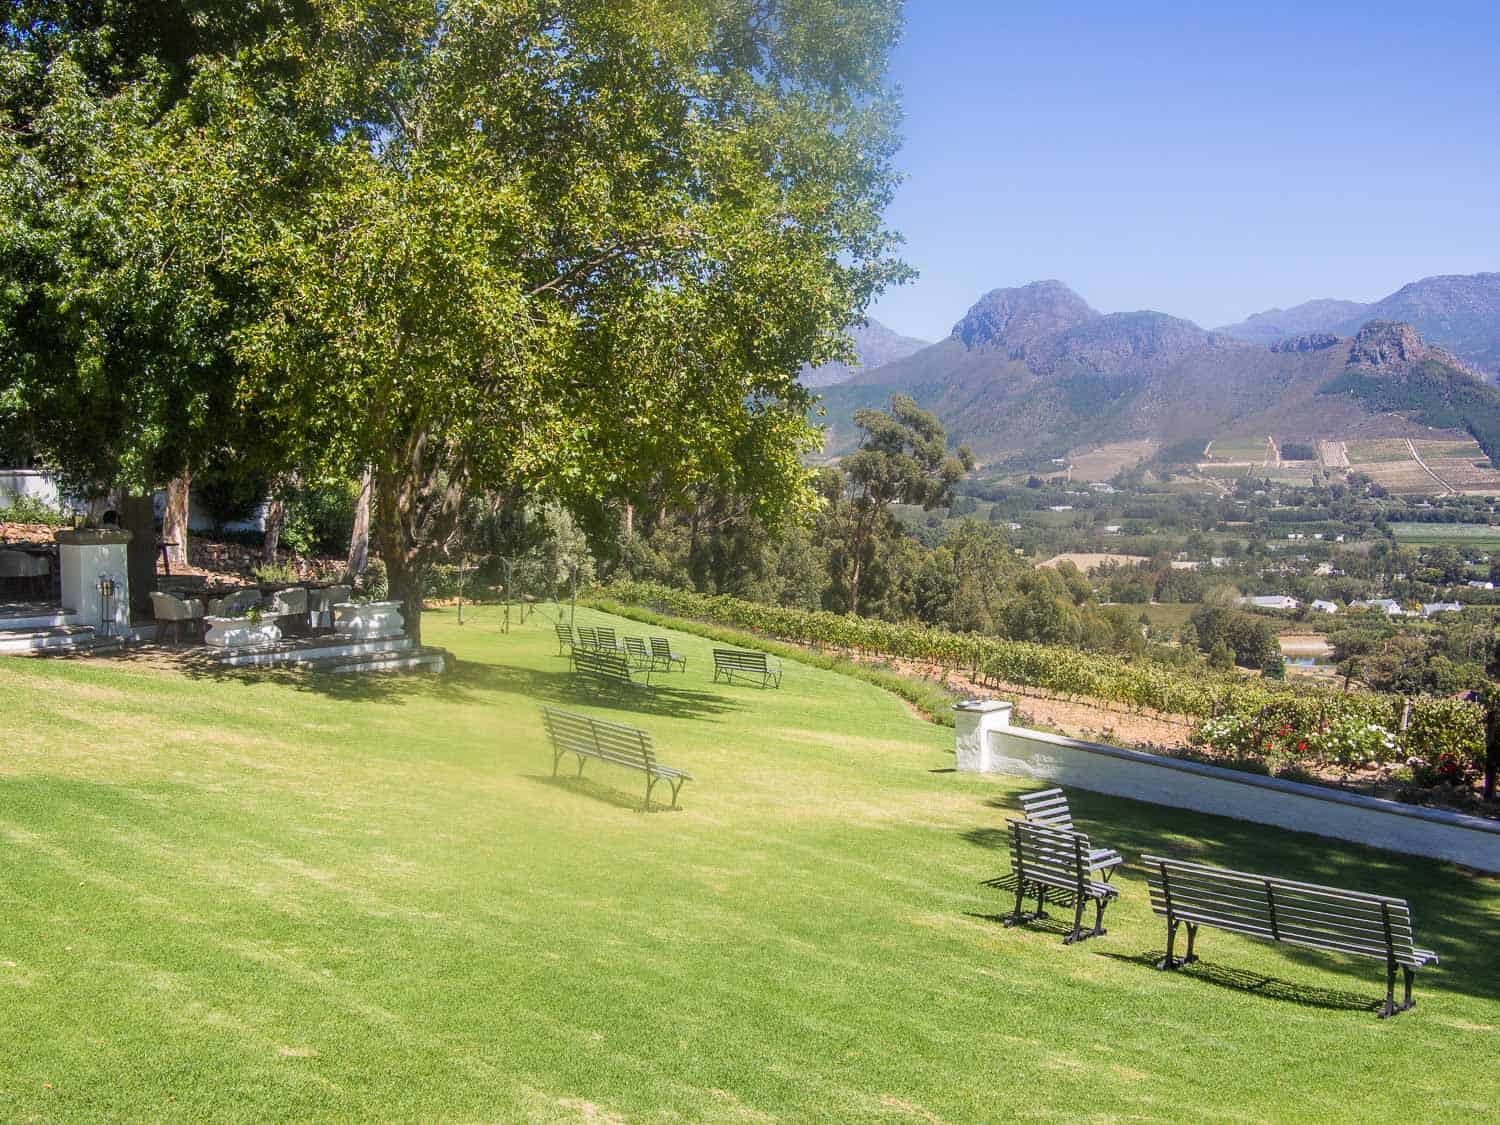 The view from La Petite Ferme restaurant in Franschhoek